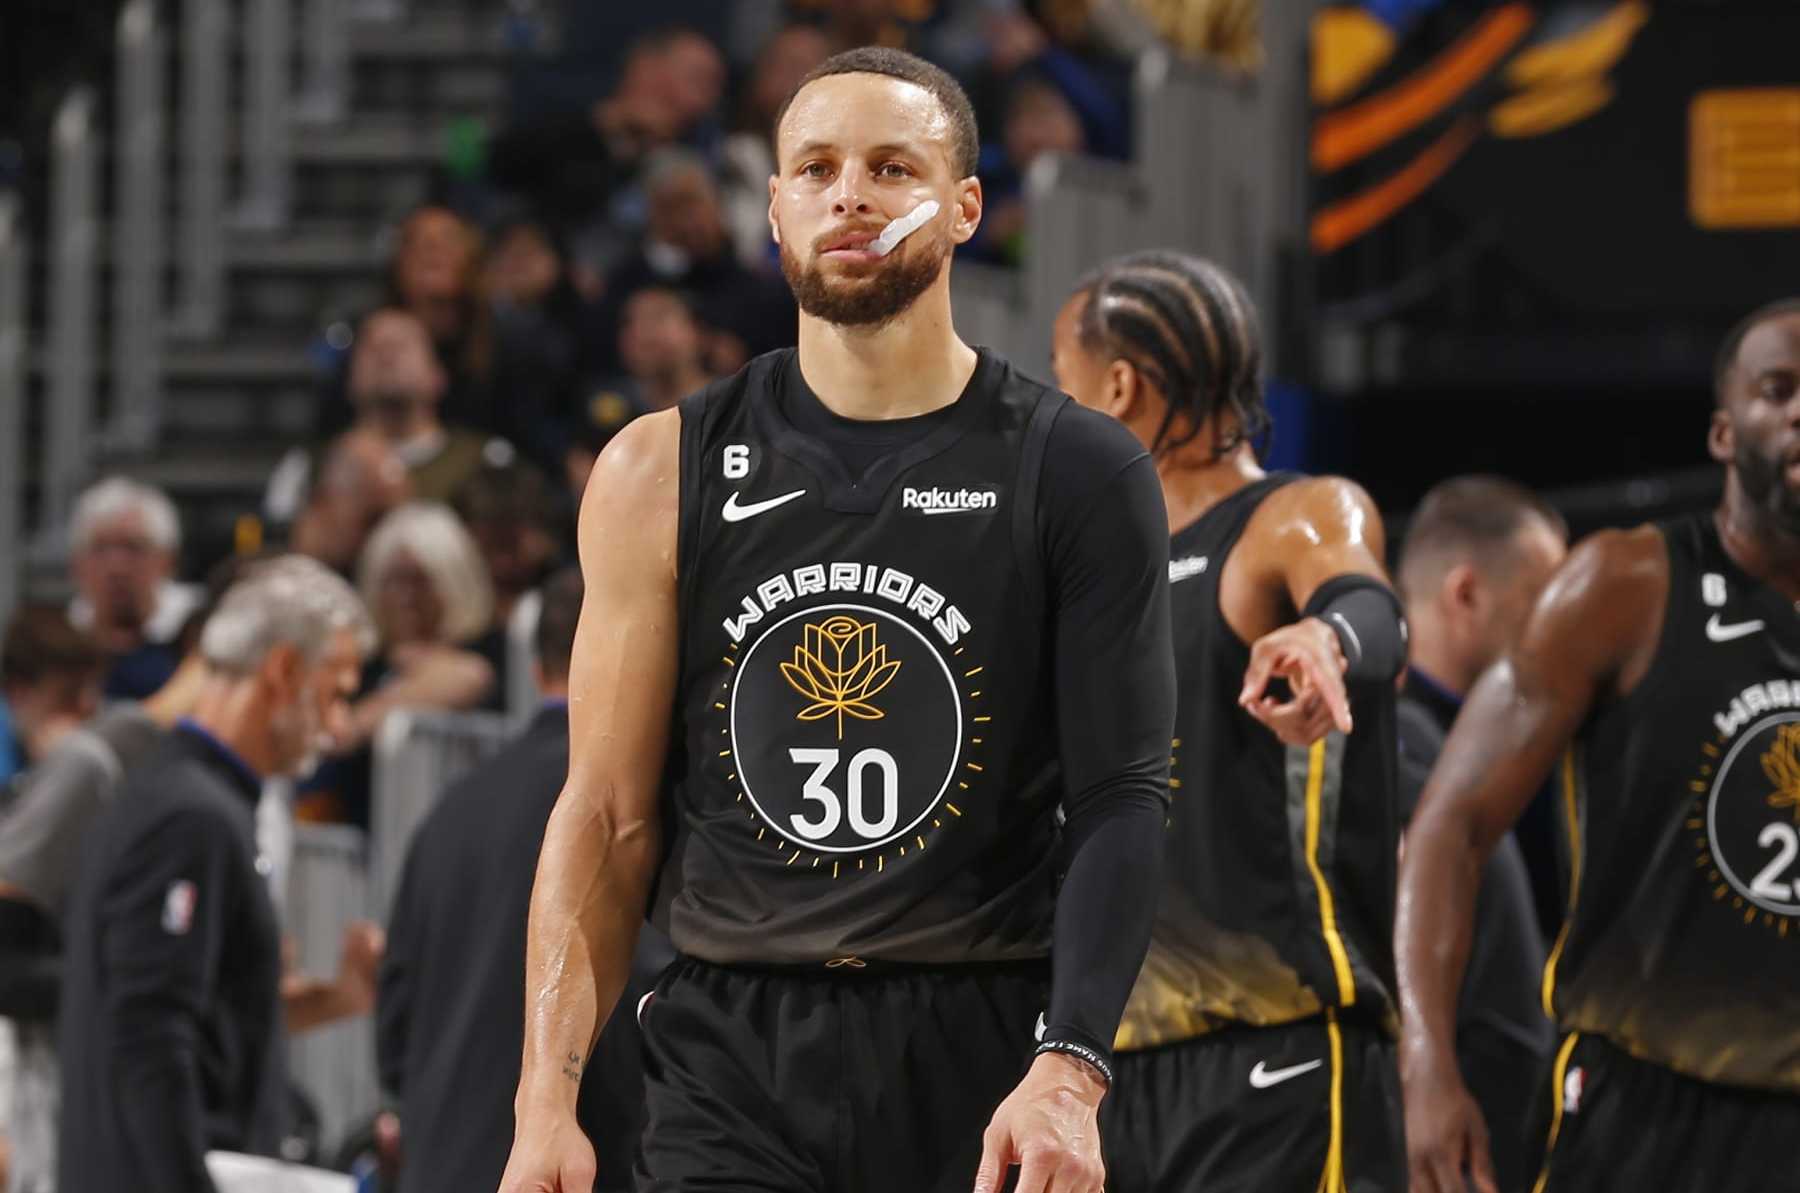 curry championship jersey